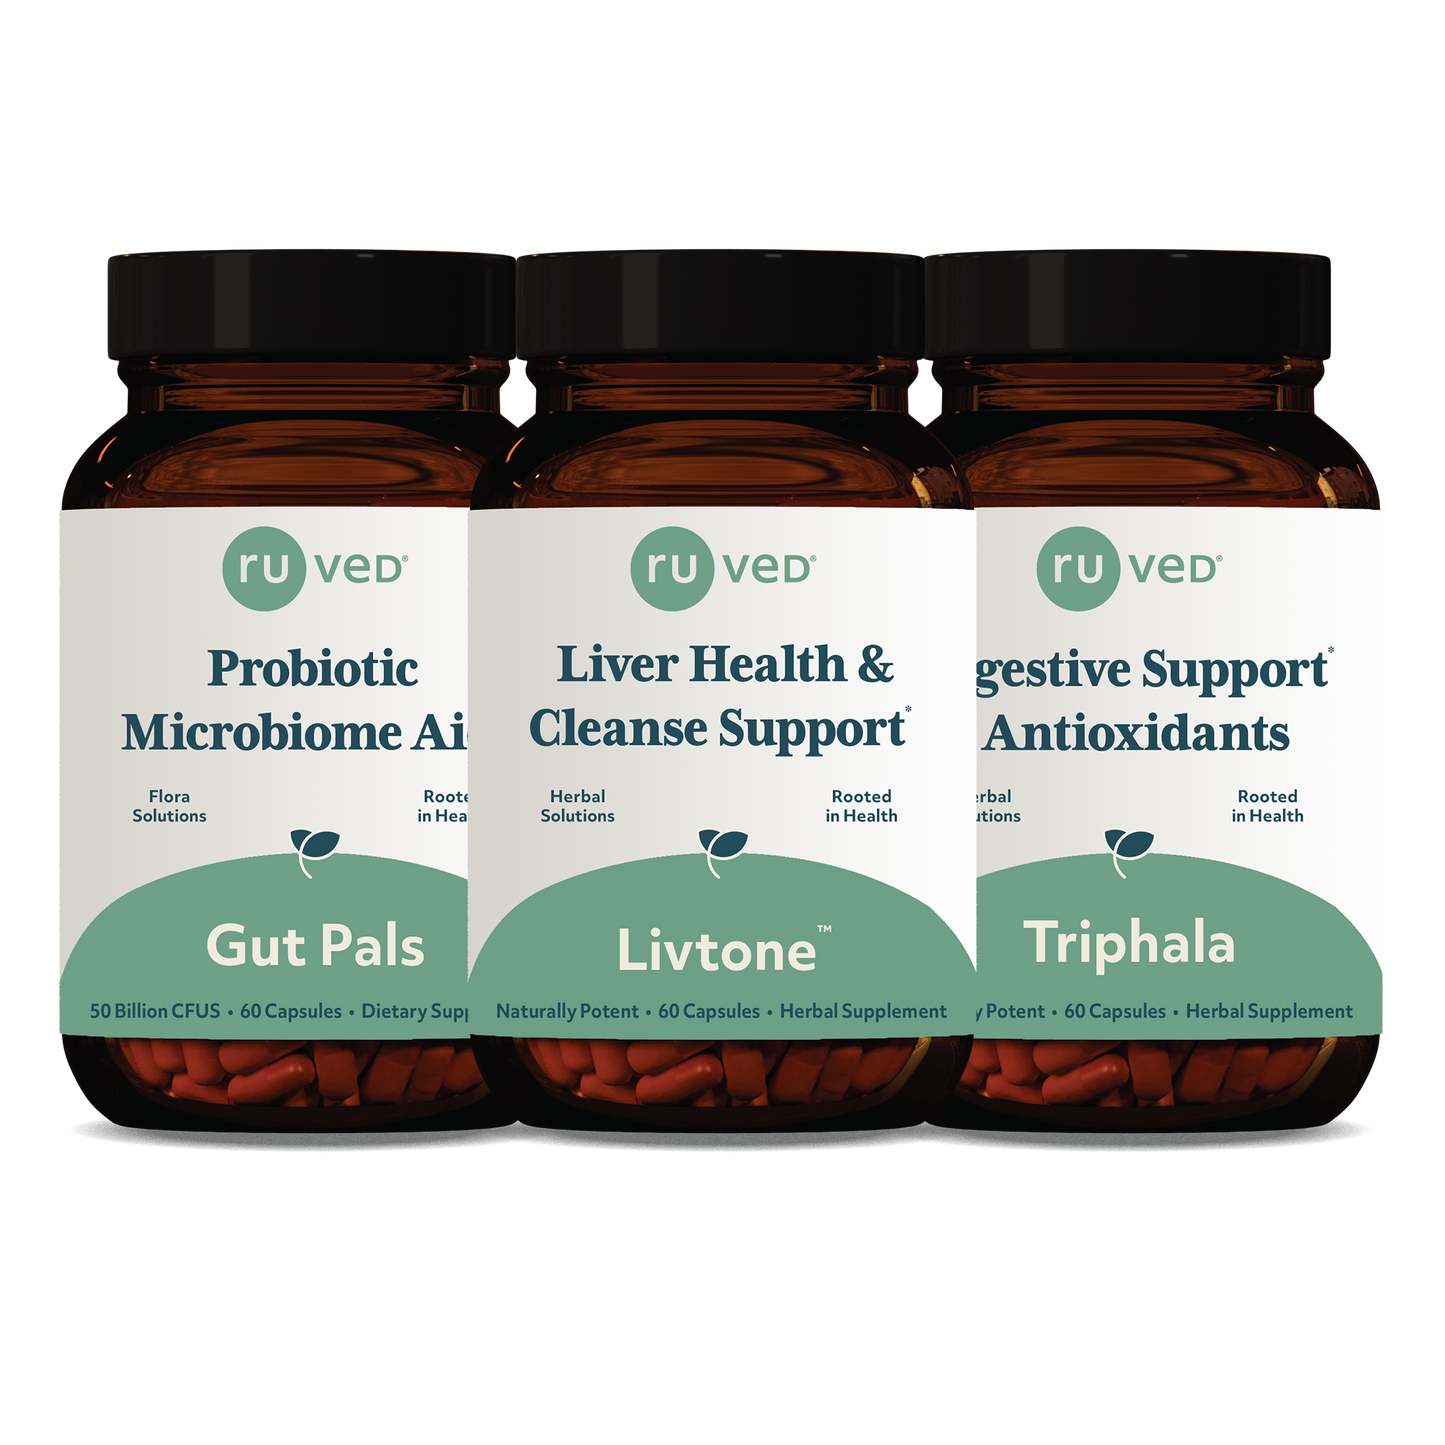 Digestive Wellness Bundle, 180 capsules. Featuring 3 products: Gut Pals, Livtone, and Triphala for Digestion & Gut Wellness.